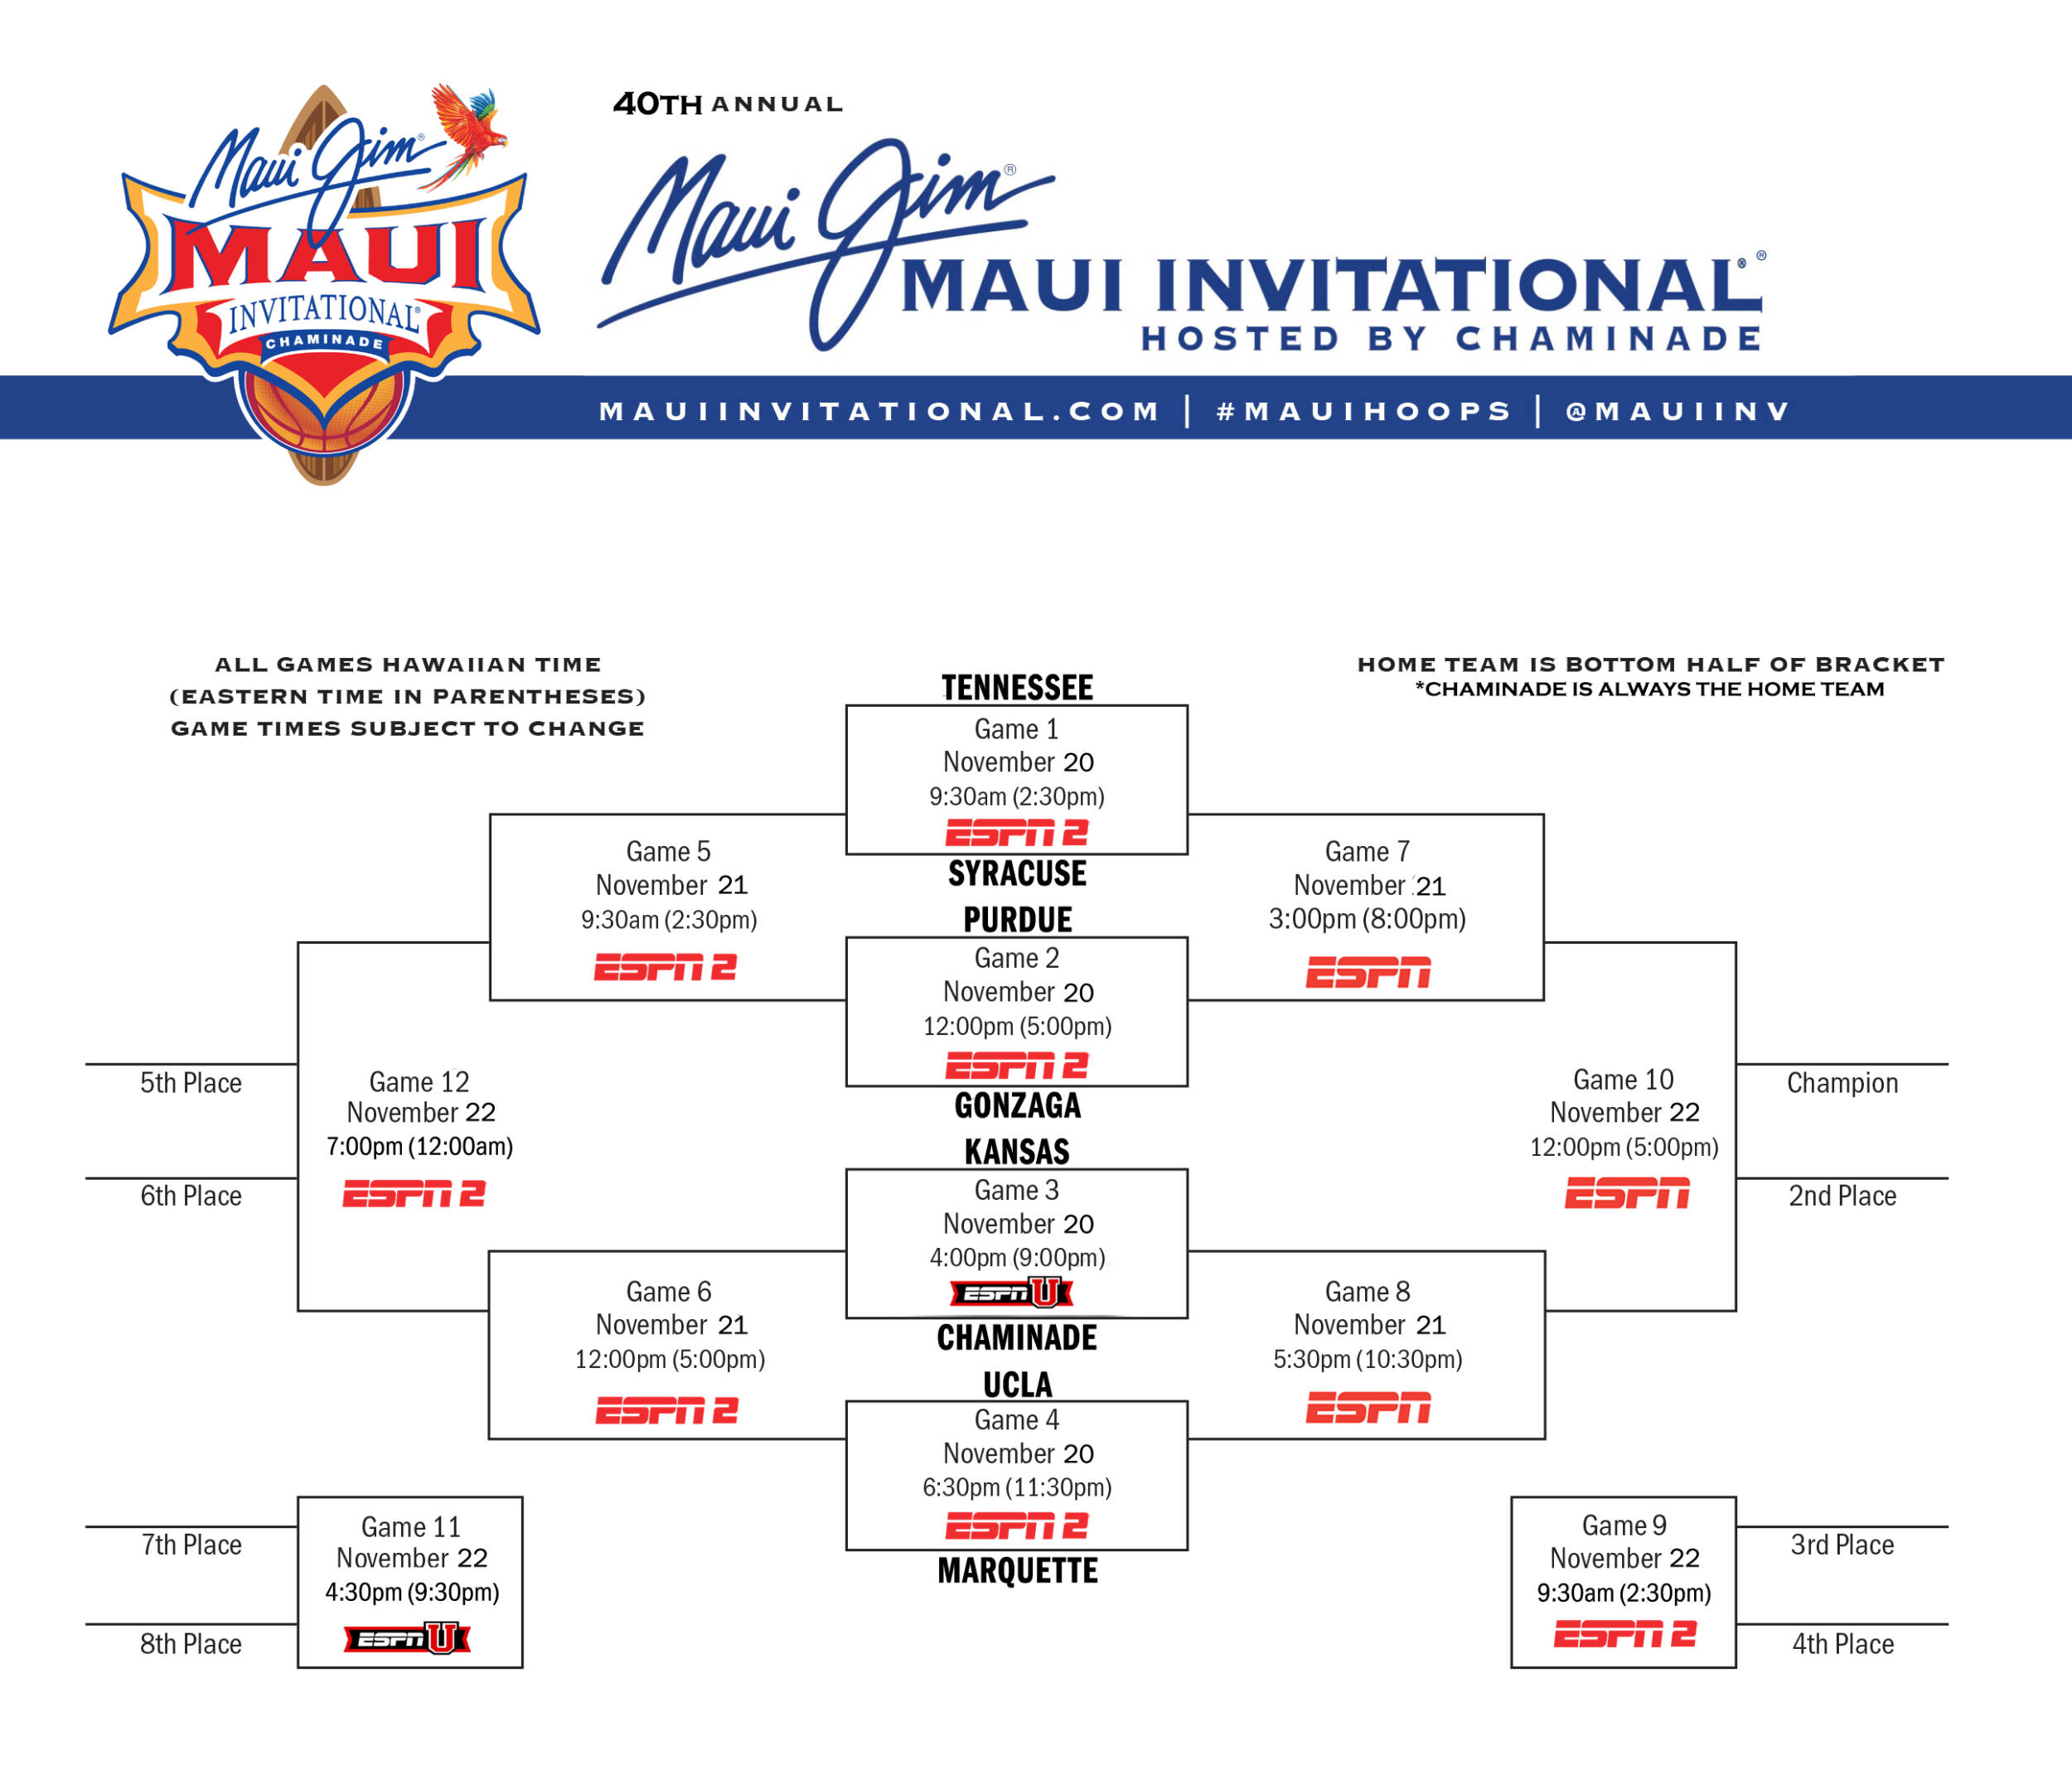 🏀 MBB KU to open with Chaminade in Maui